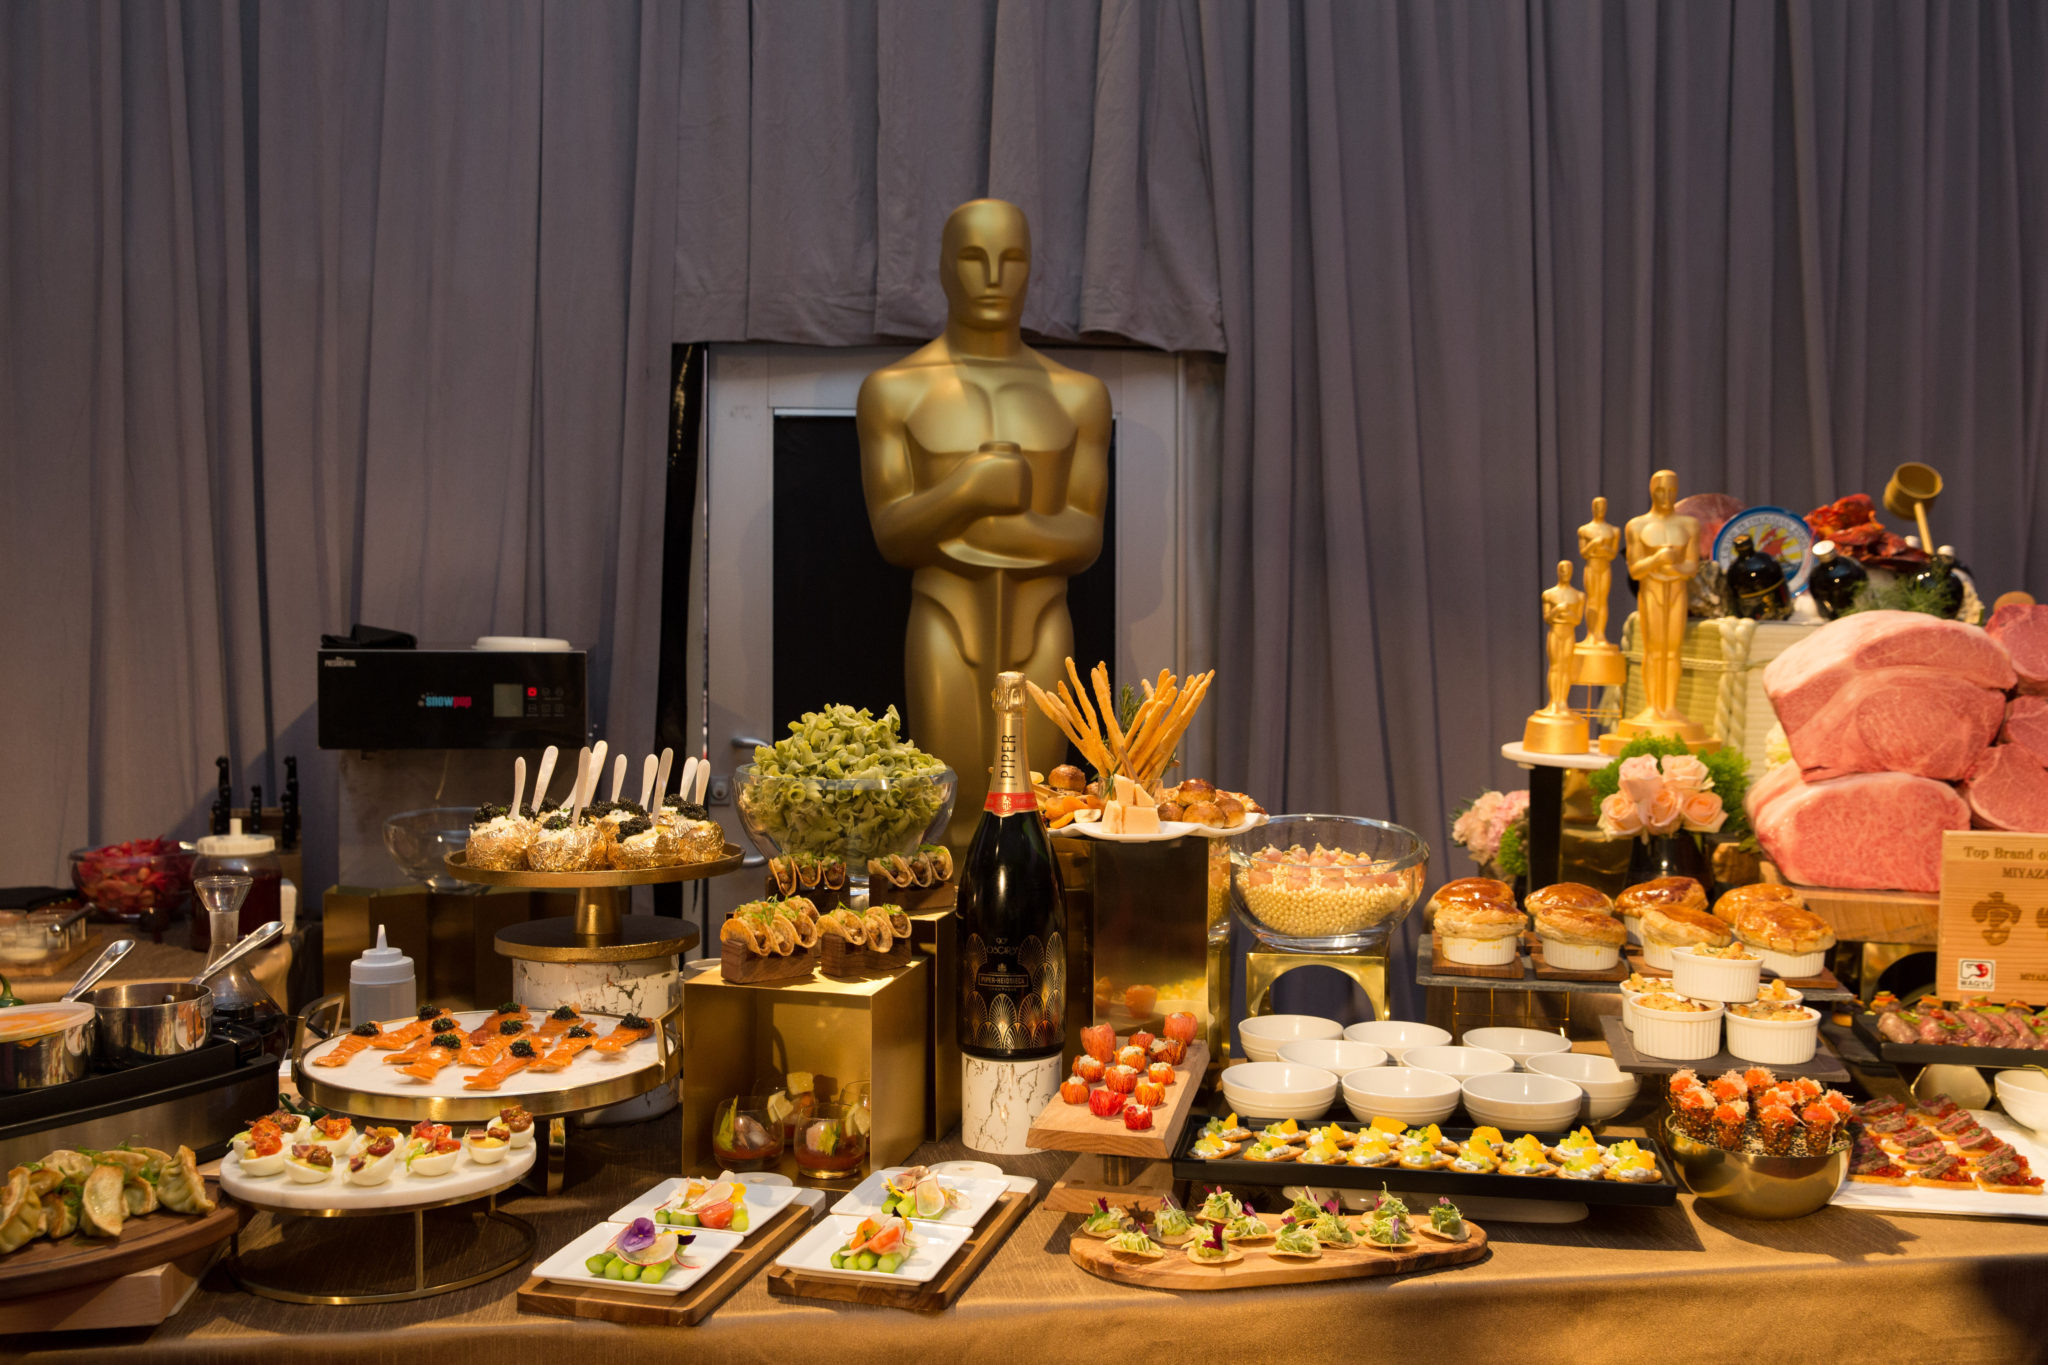 90th Oscars®, Governors Ball Preview 4Chion Lifestyle